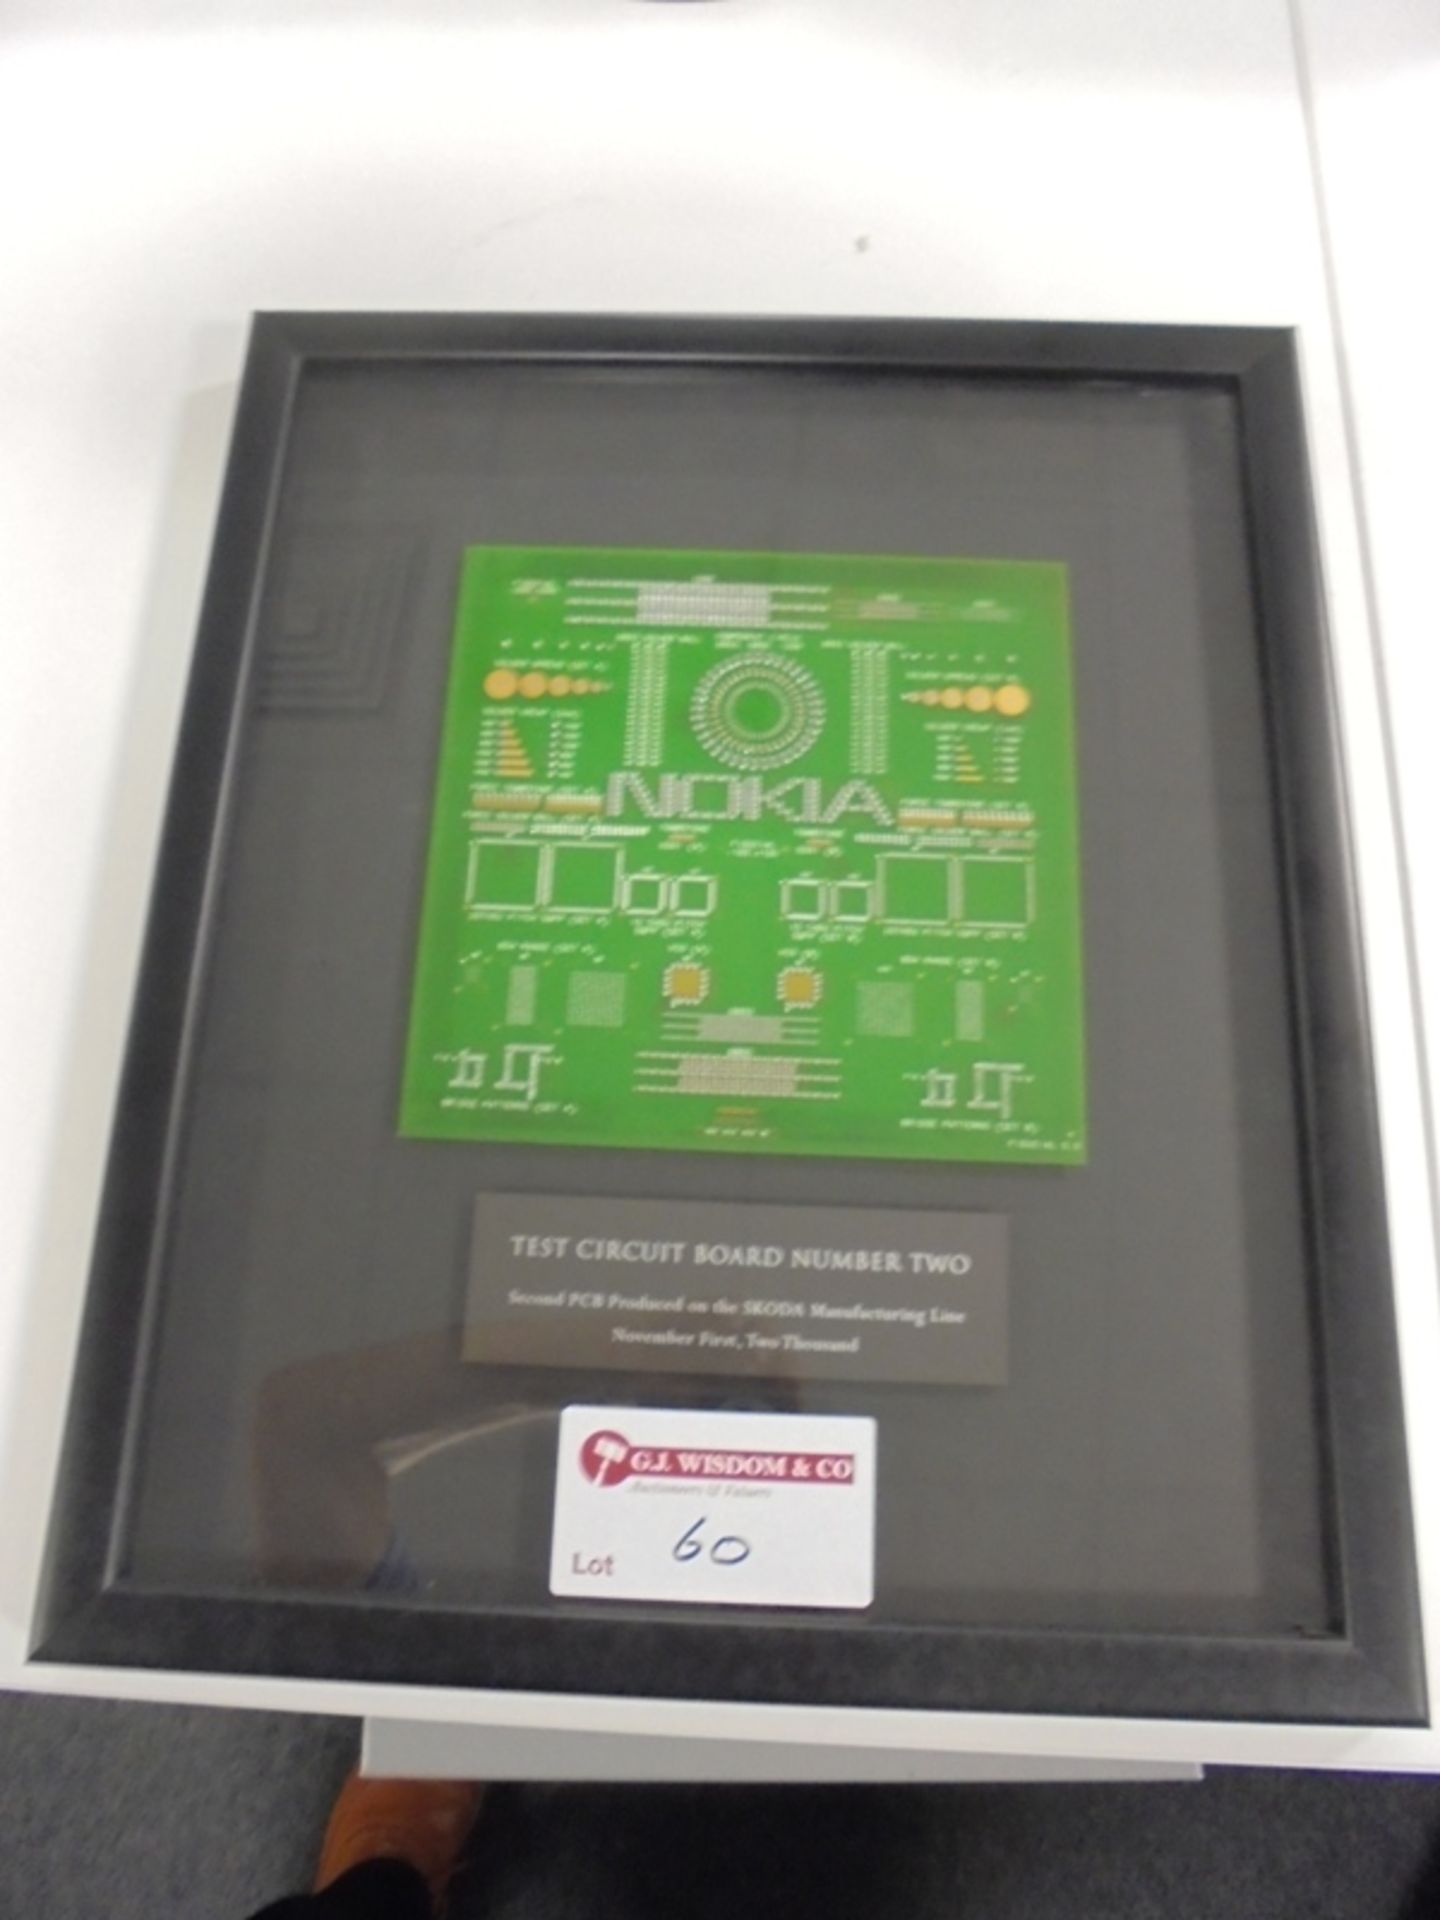 Framed & Glazed Presentation of "Test Circuit Board Number Two" Second PCB Produced on the SKODA